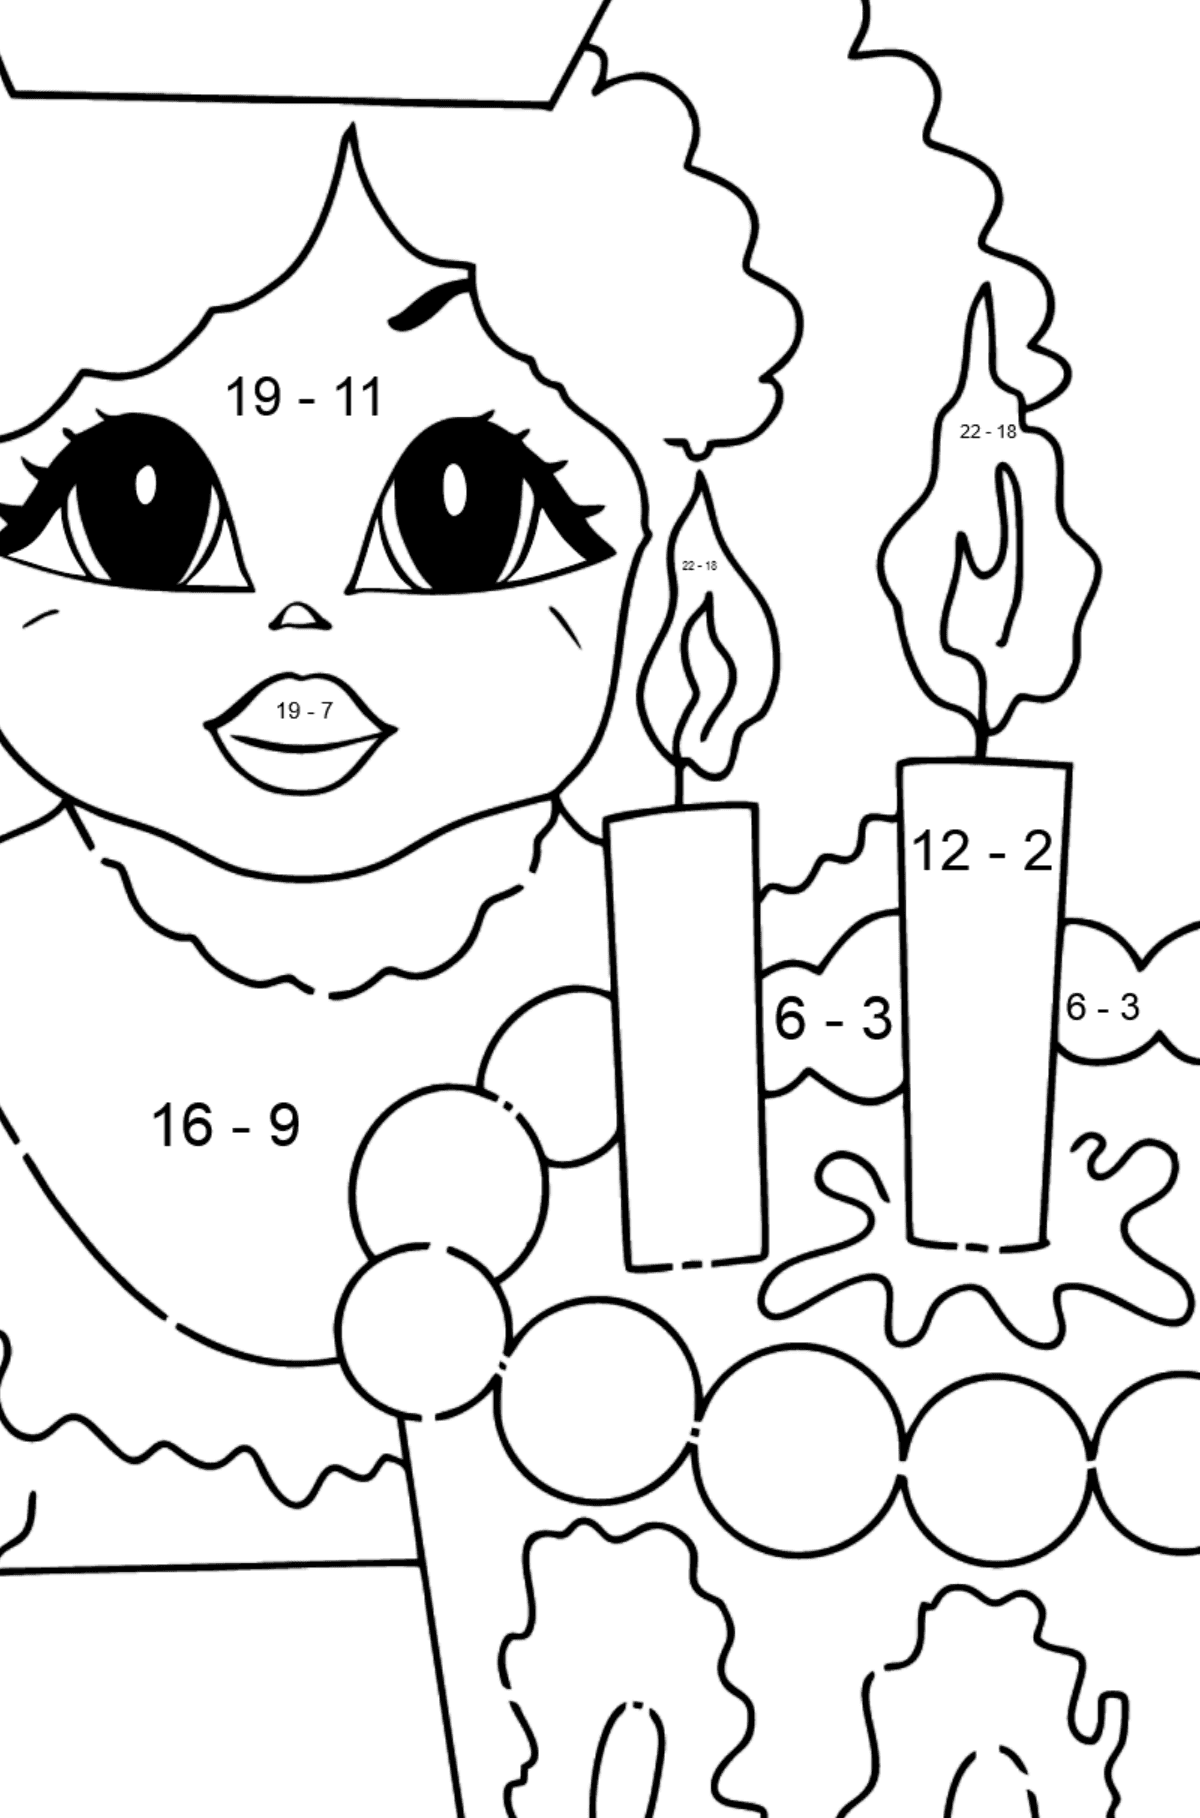 Coloring Page - A Princess with Cake - For Girls - Math Coloring - Subtraction for Kids